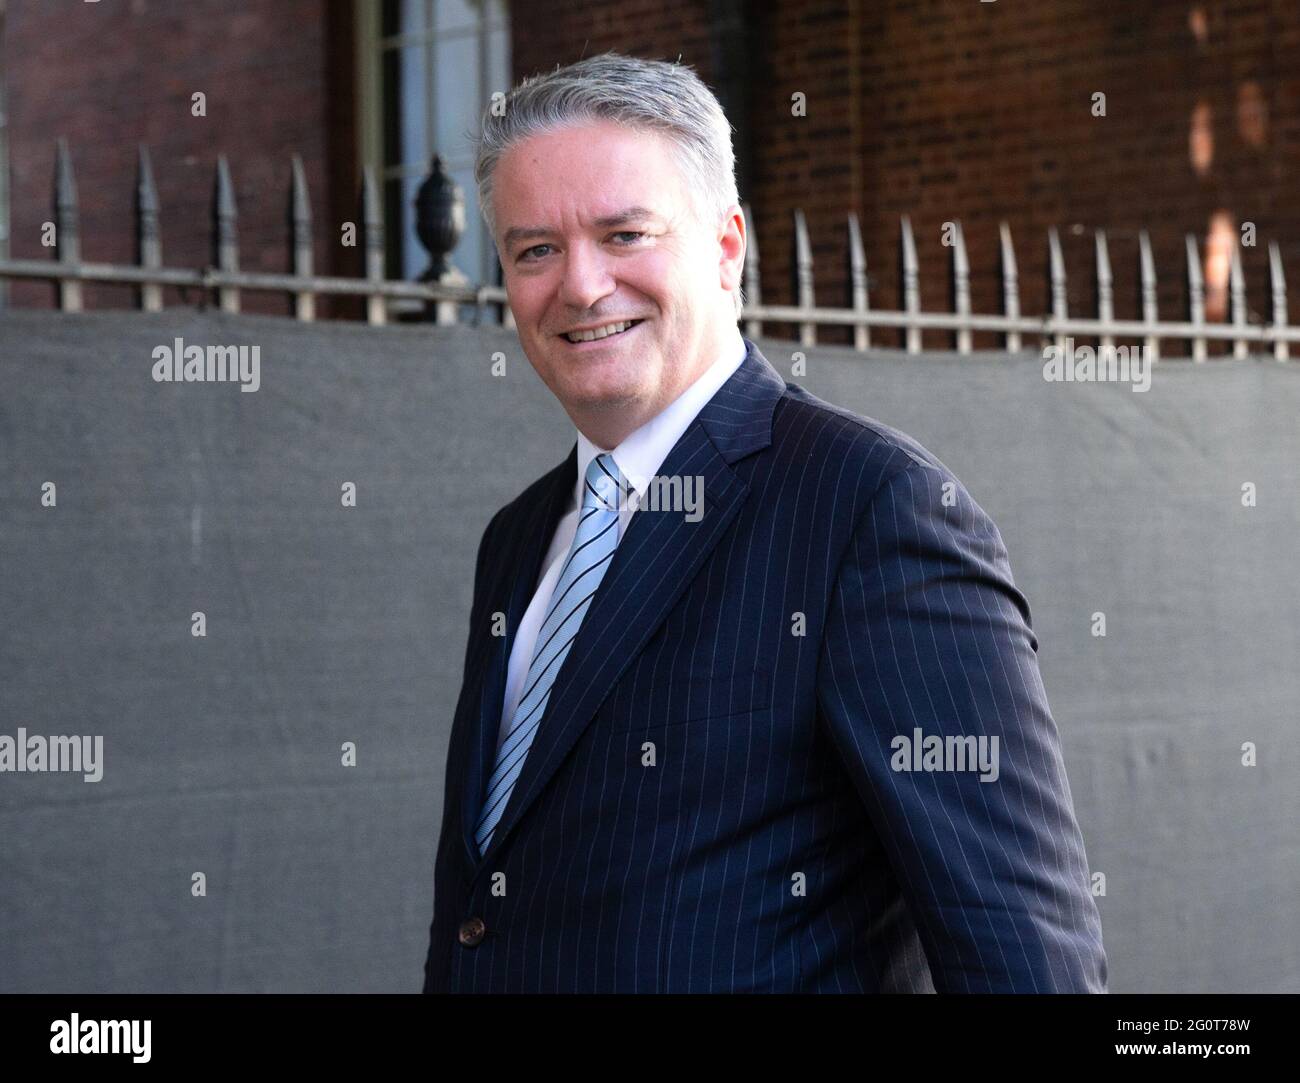 London, UK. 3rd June, 2021. Mathias Cormann, Secretary-General of the Organisation for Economic Co-Operation and Development, at Downing Street for a meeting ahead of the G7 Finance Ministers meeting which starts in London on June 4th. It is his second full day in the job Credit: Mark Thomas/Alamy Live News Stock Photo